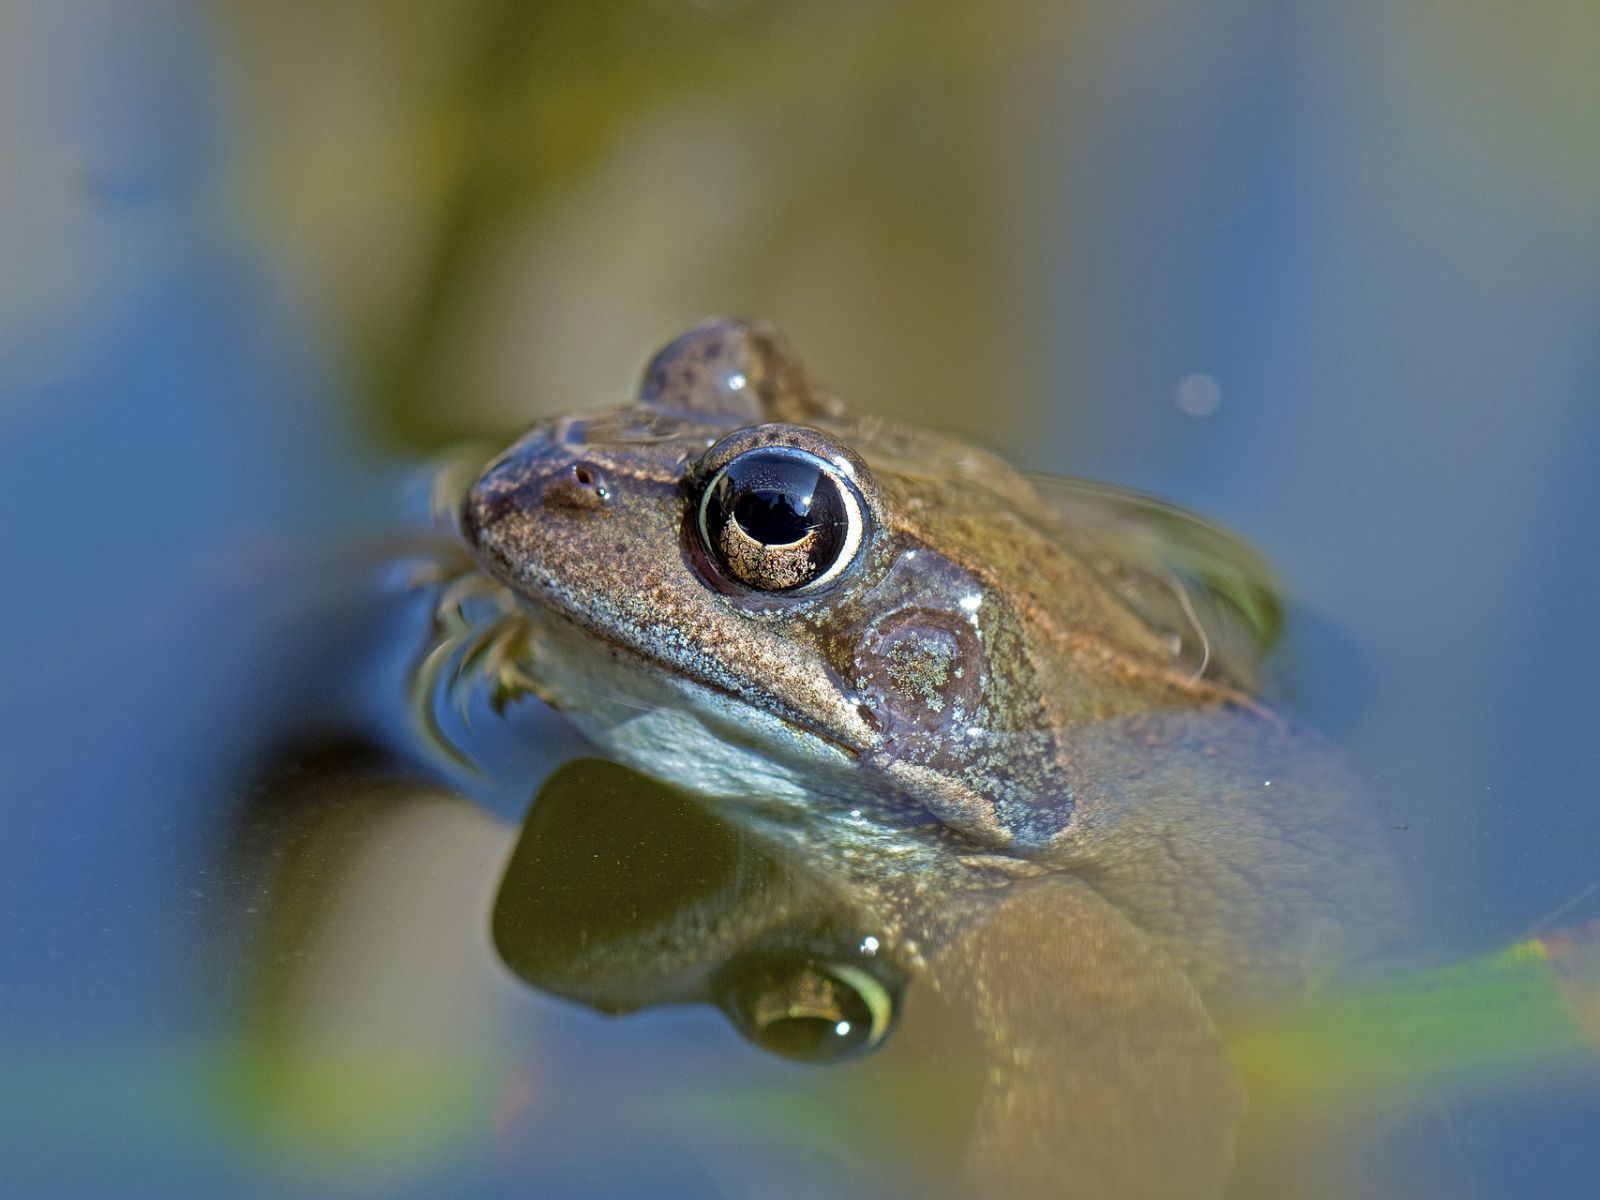 1600x1200 Desktop Wallpaper Frog Toad Amphibian Reflections Animal Hd Image Picture Background Wjcq Y